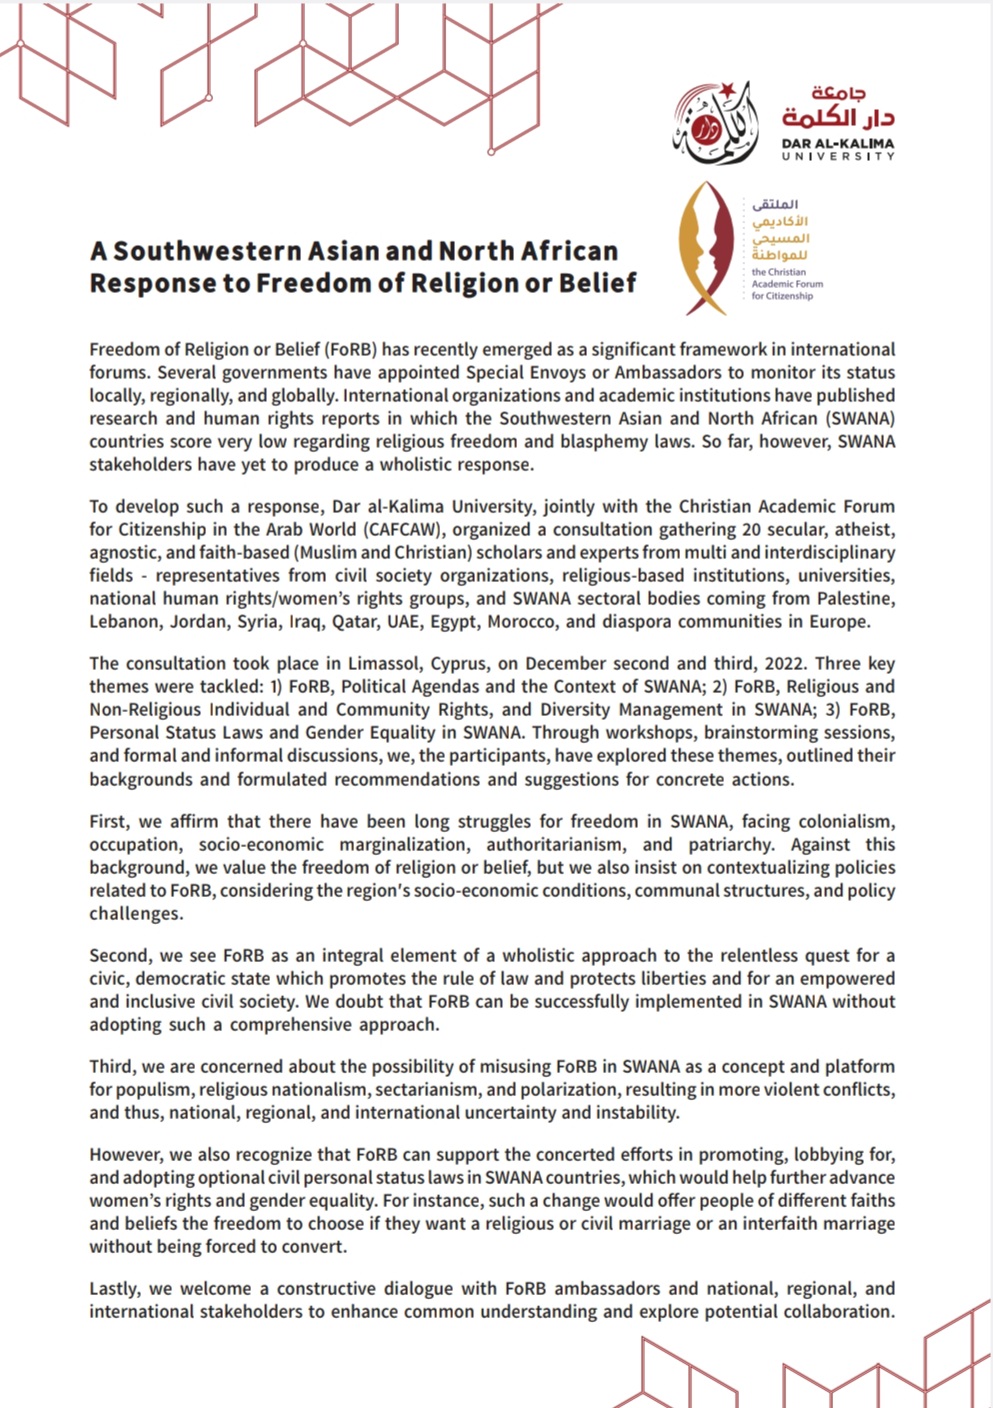 A Southwestern Asian and North African Response to Freedom of Religion or Belief – Statement & Position Paper